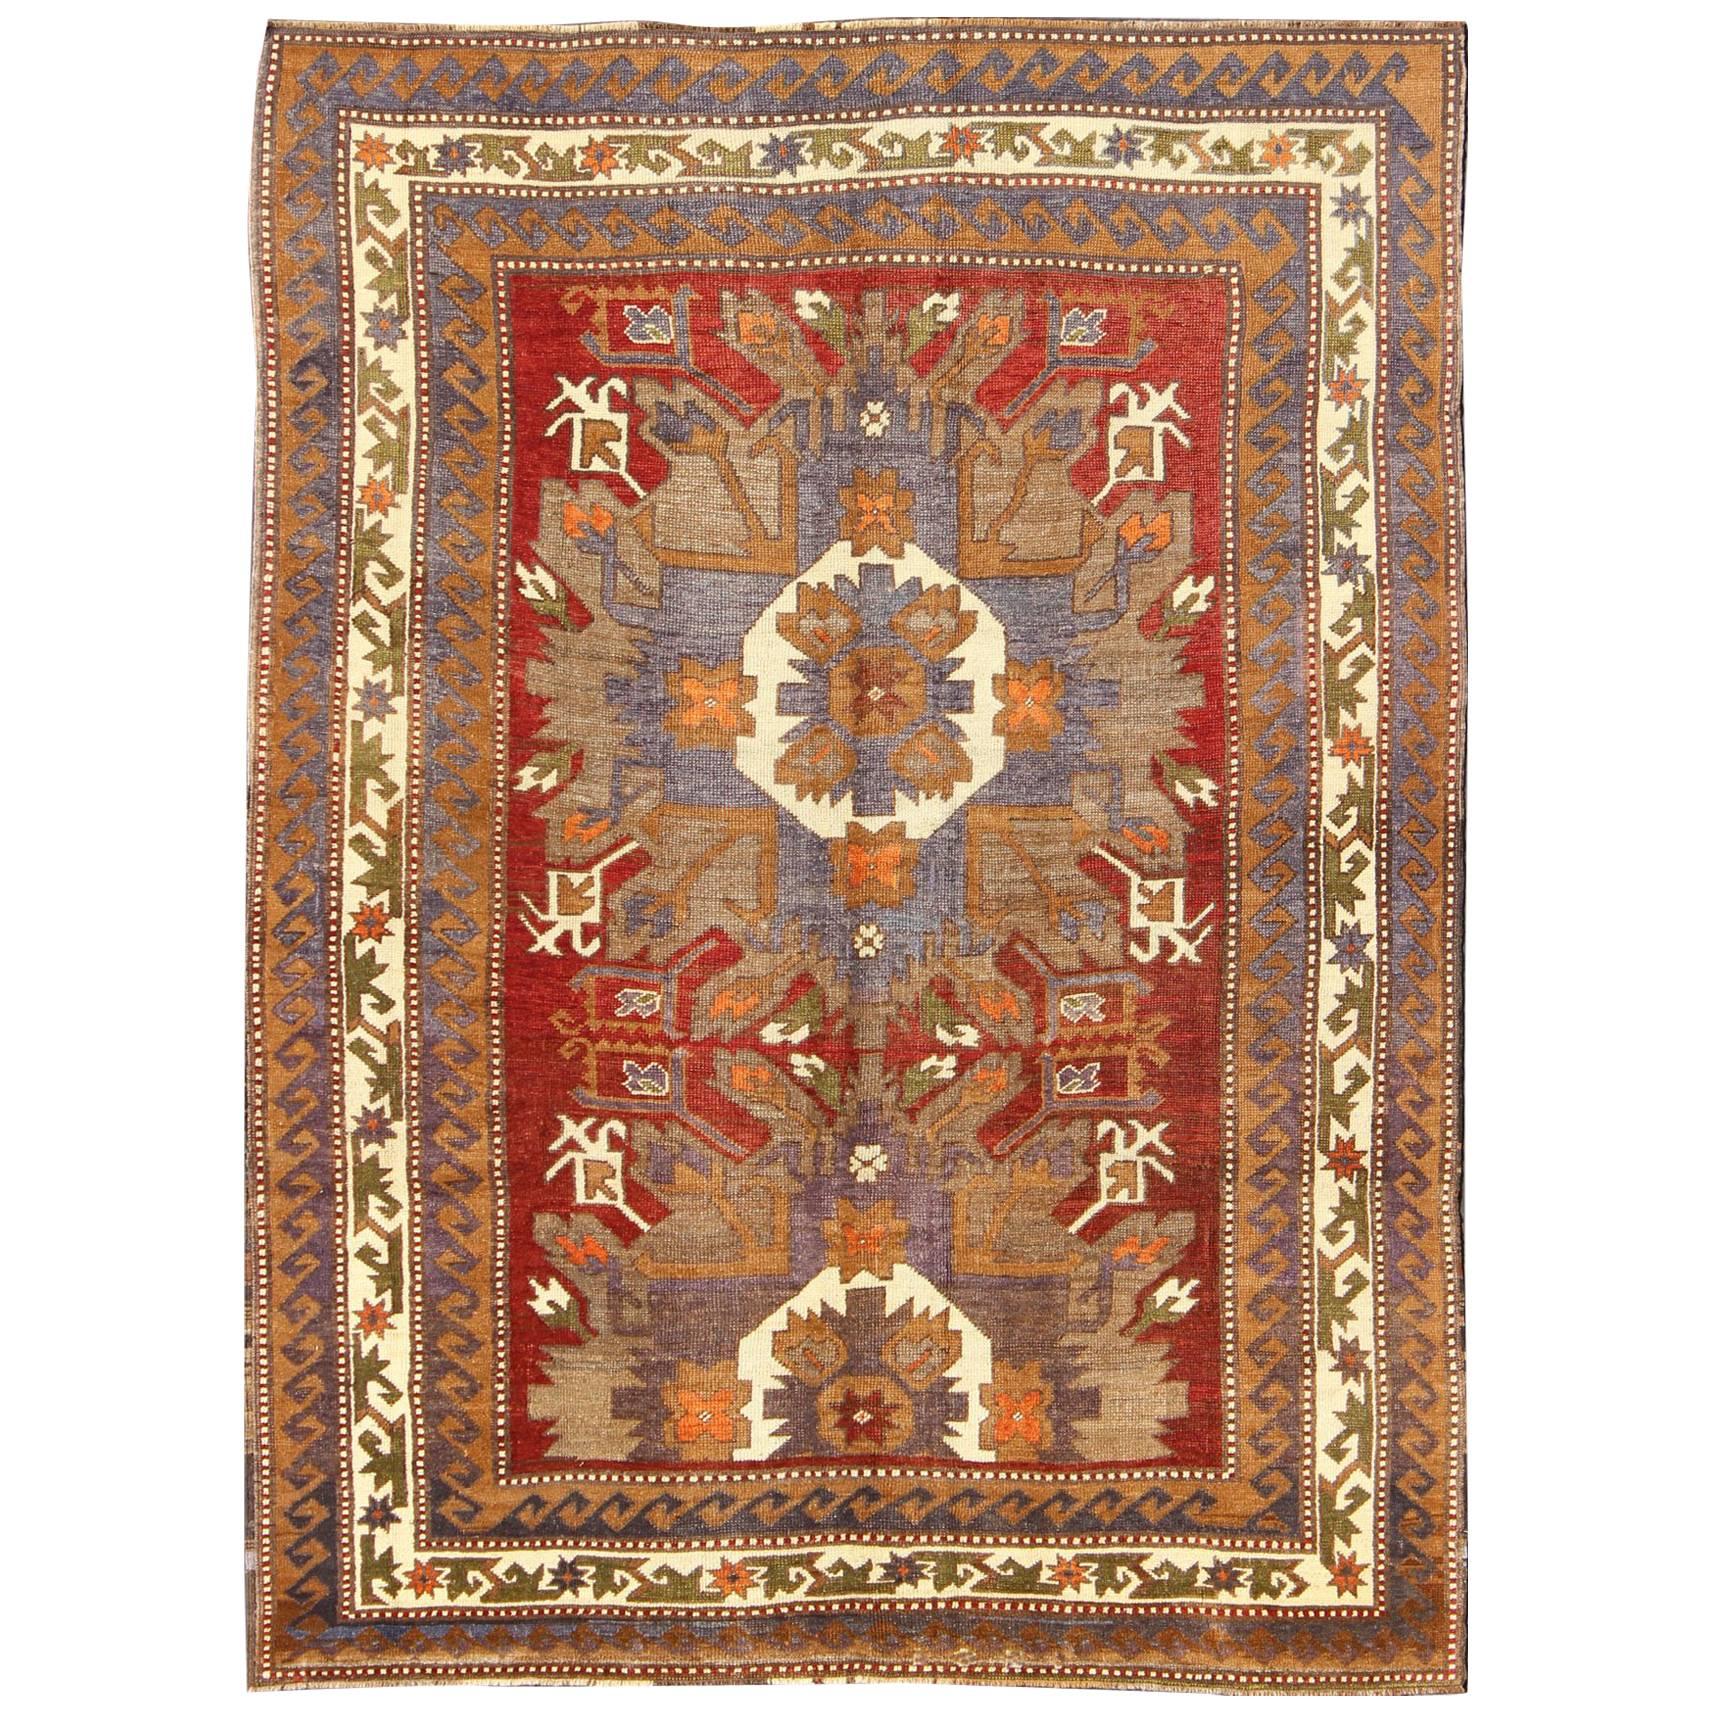 Large Turkish Vintage Oushak Rug with Medallions in Red, Taupe, Olive and Gray